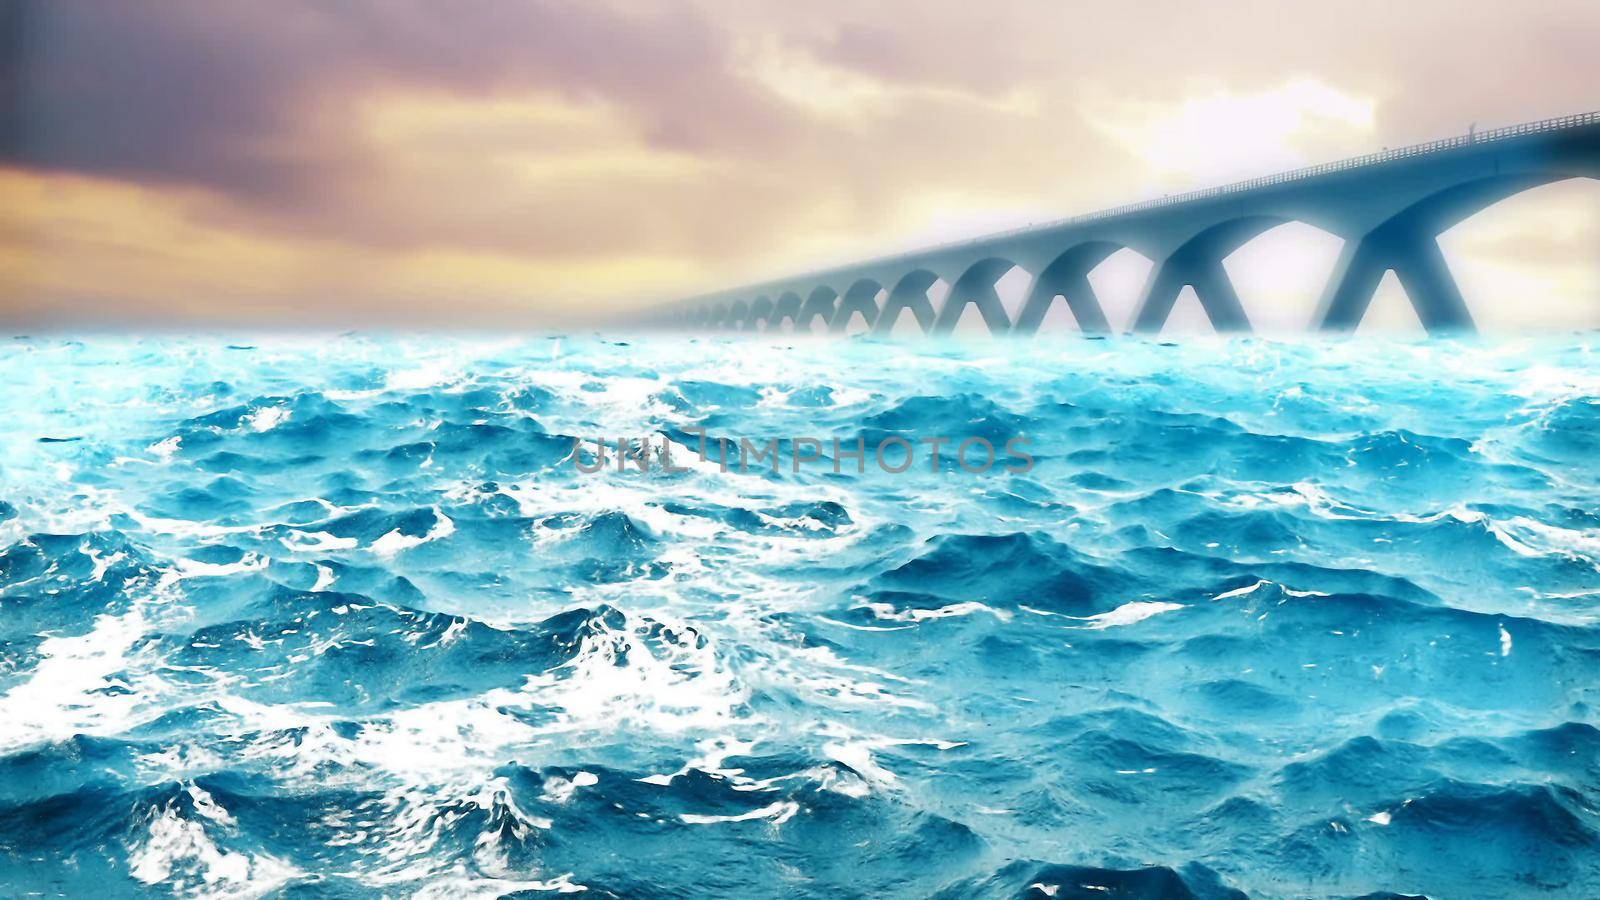 ocean waves with beautiful bridge on the background.